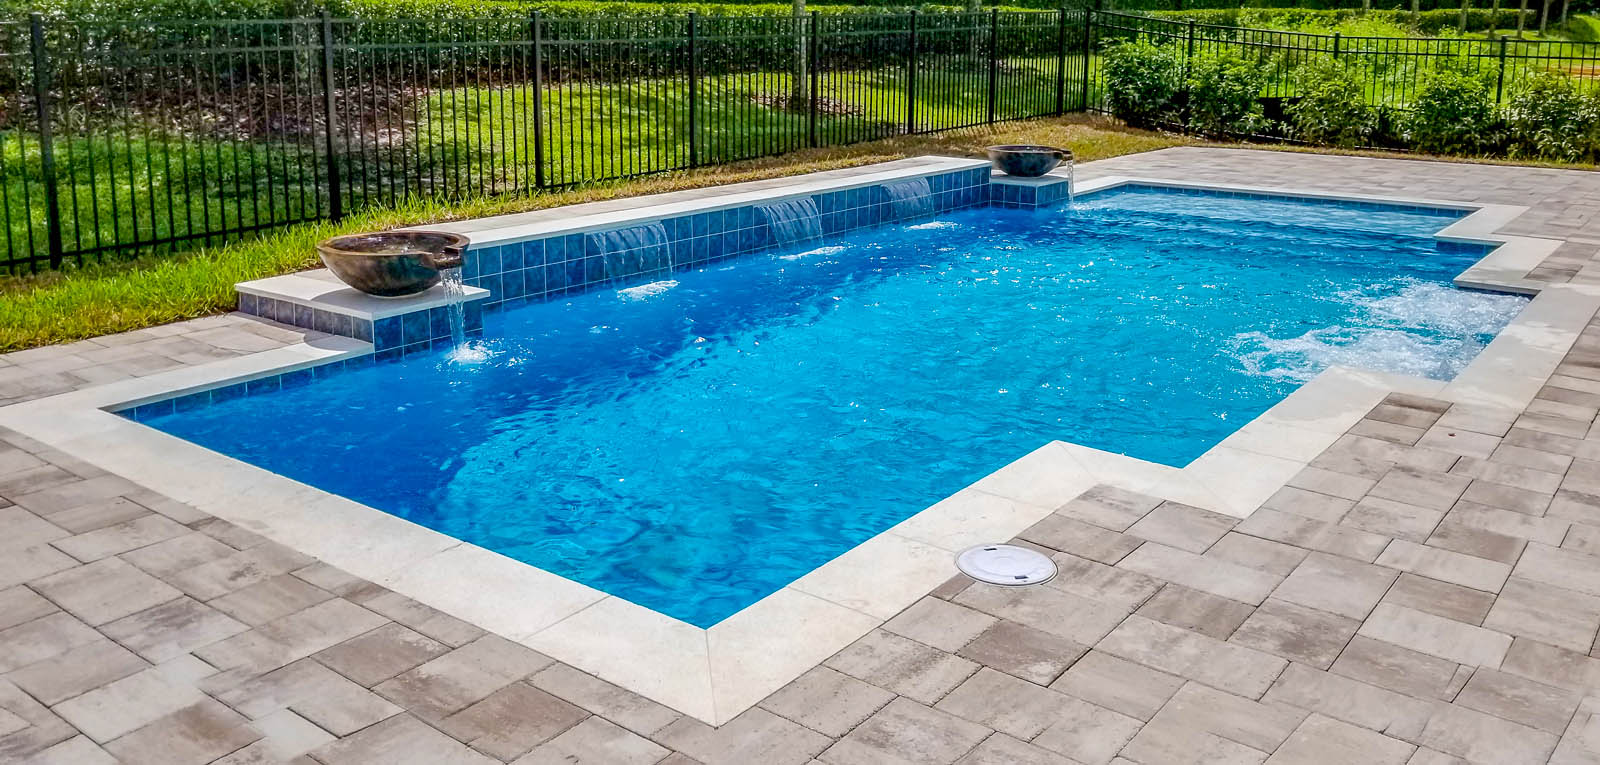 Modified Rectangular Pool with Water Bowls